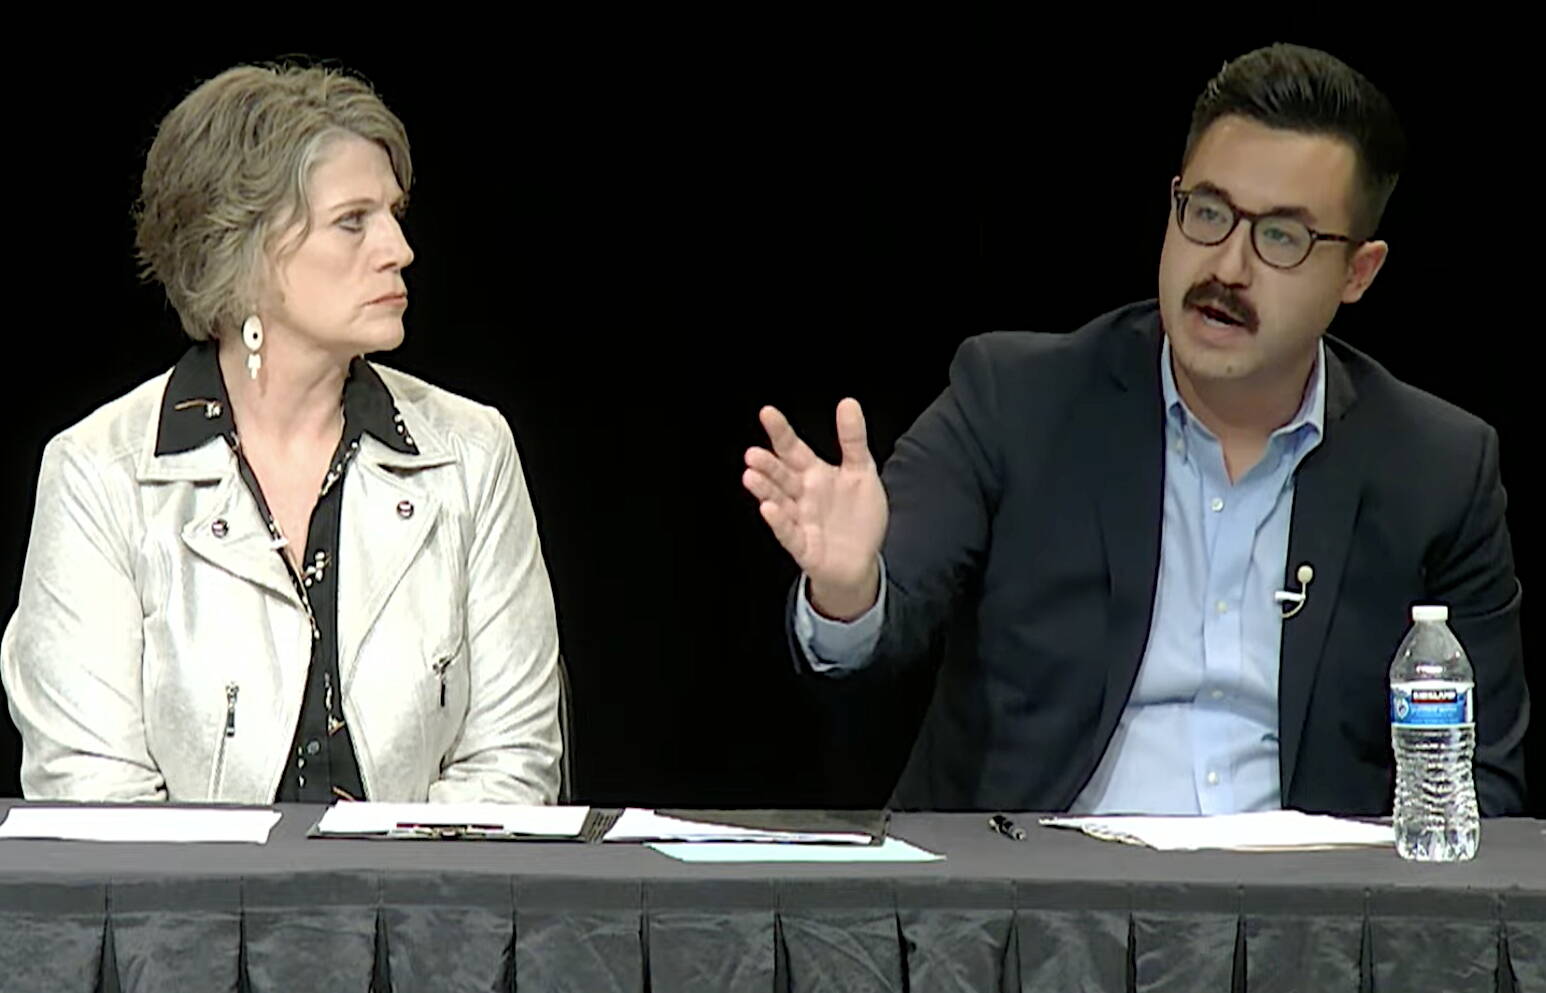 Joelle Hall, left, president of the Alaska AFL-CIO, listens to Matt Shuckerow, a spokesperson for a group opposed to a state constitutional convention, argue his case during Thursday night’s debate. (Screenshot from Alaska Public Media’s YouTube channel)